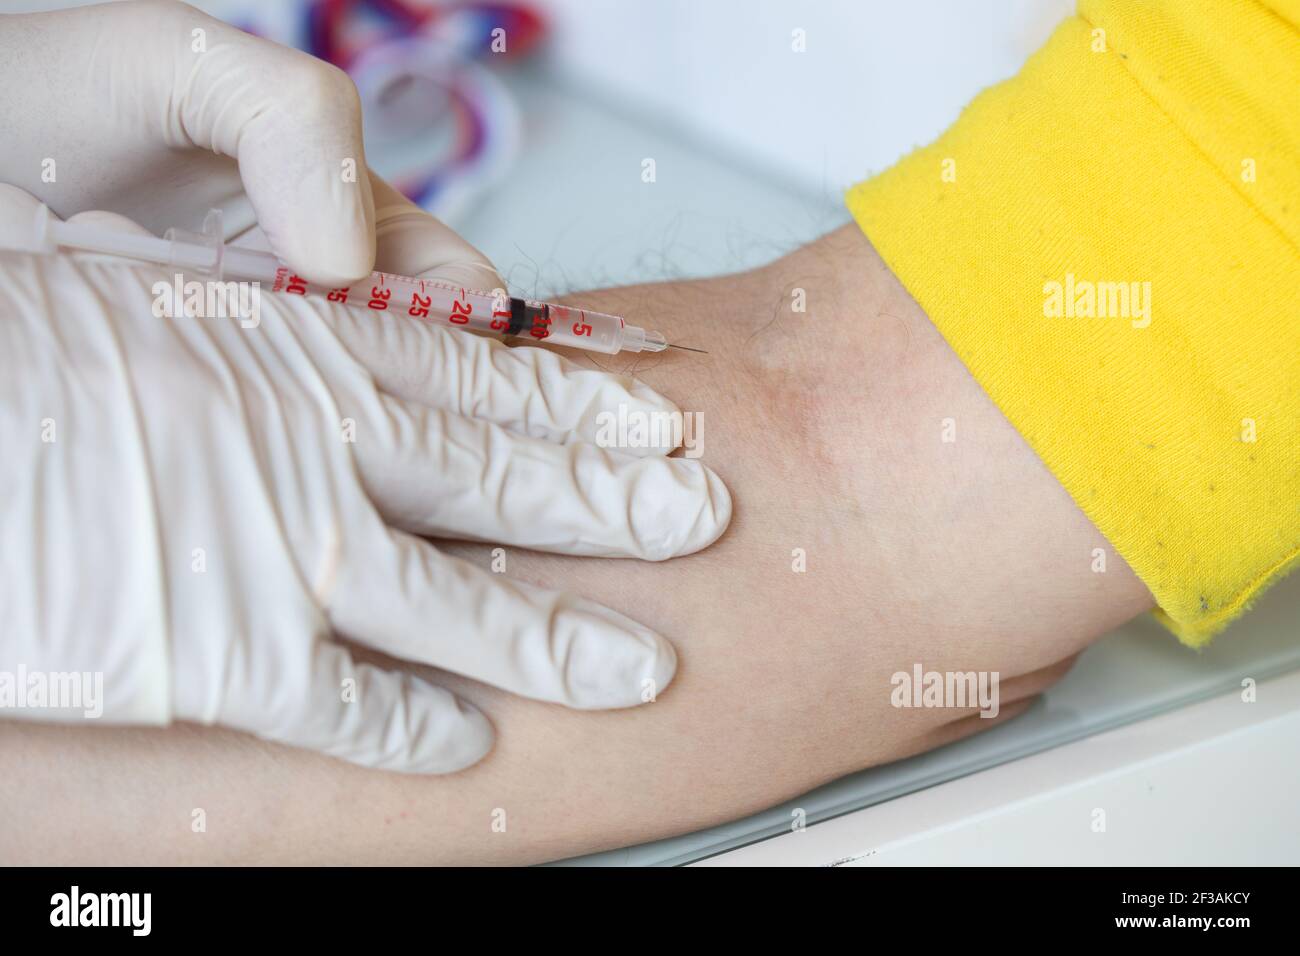 Medical assistant is about to administrate medication in the arm of a man. Closeup Stock Photo